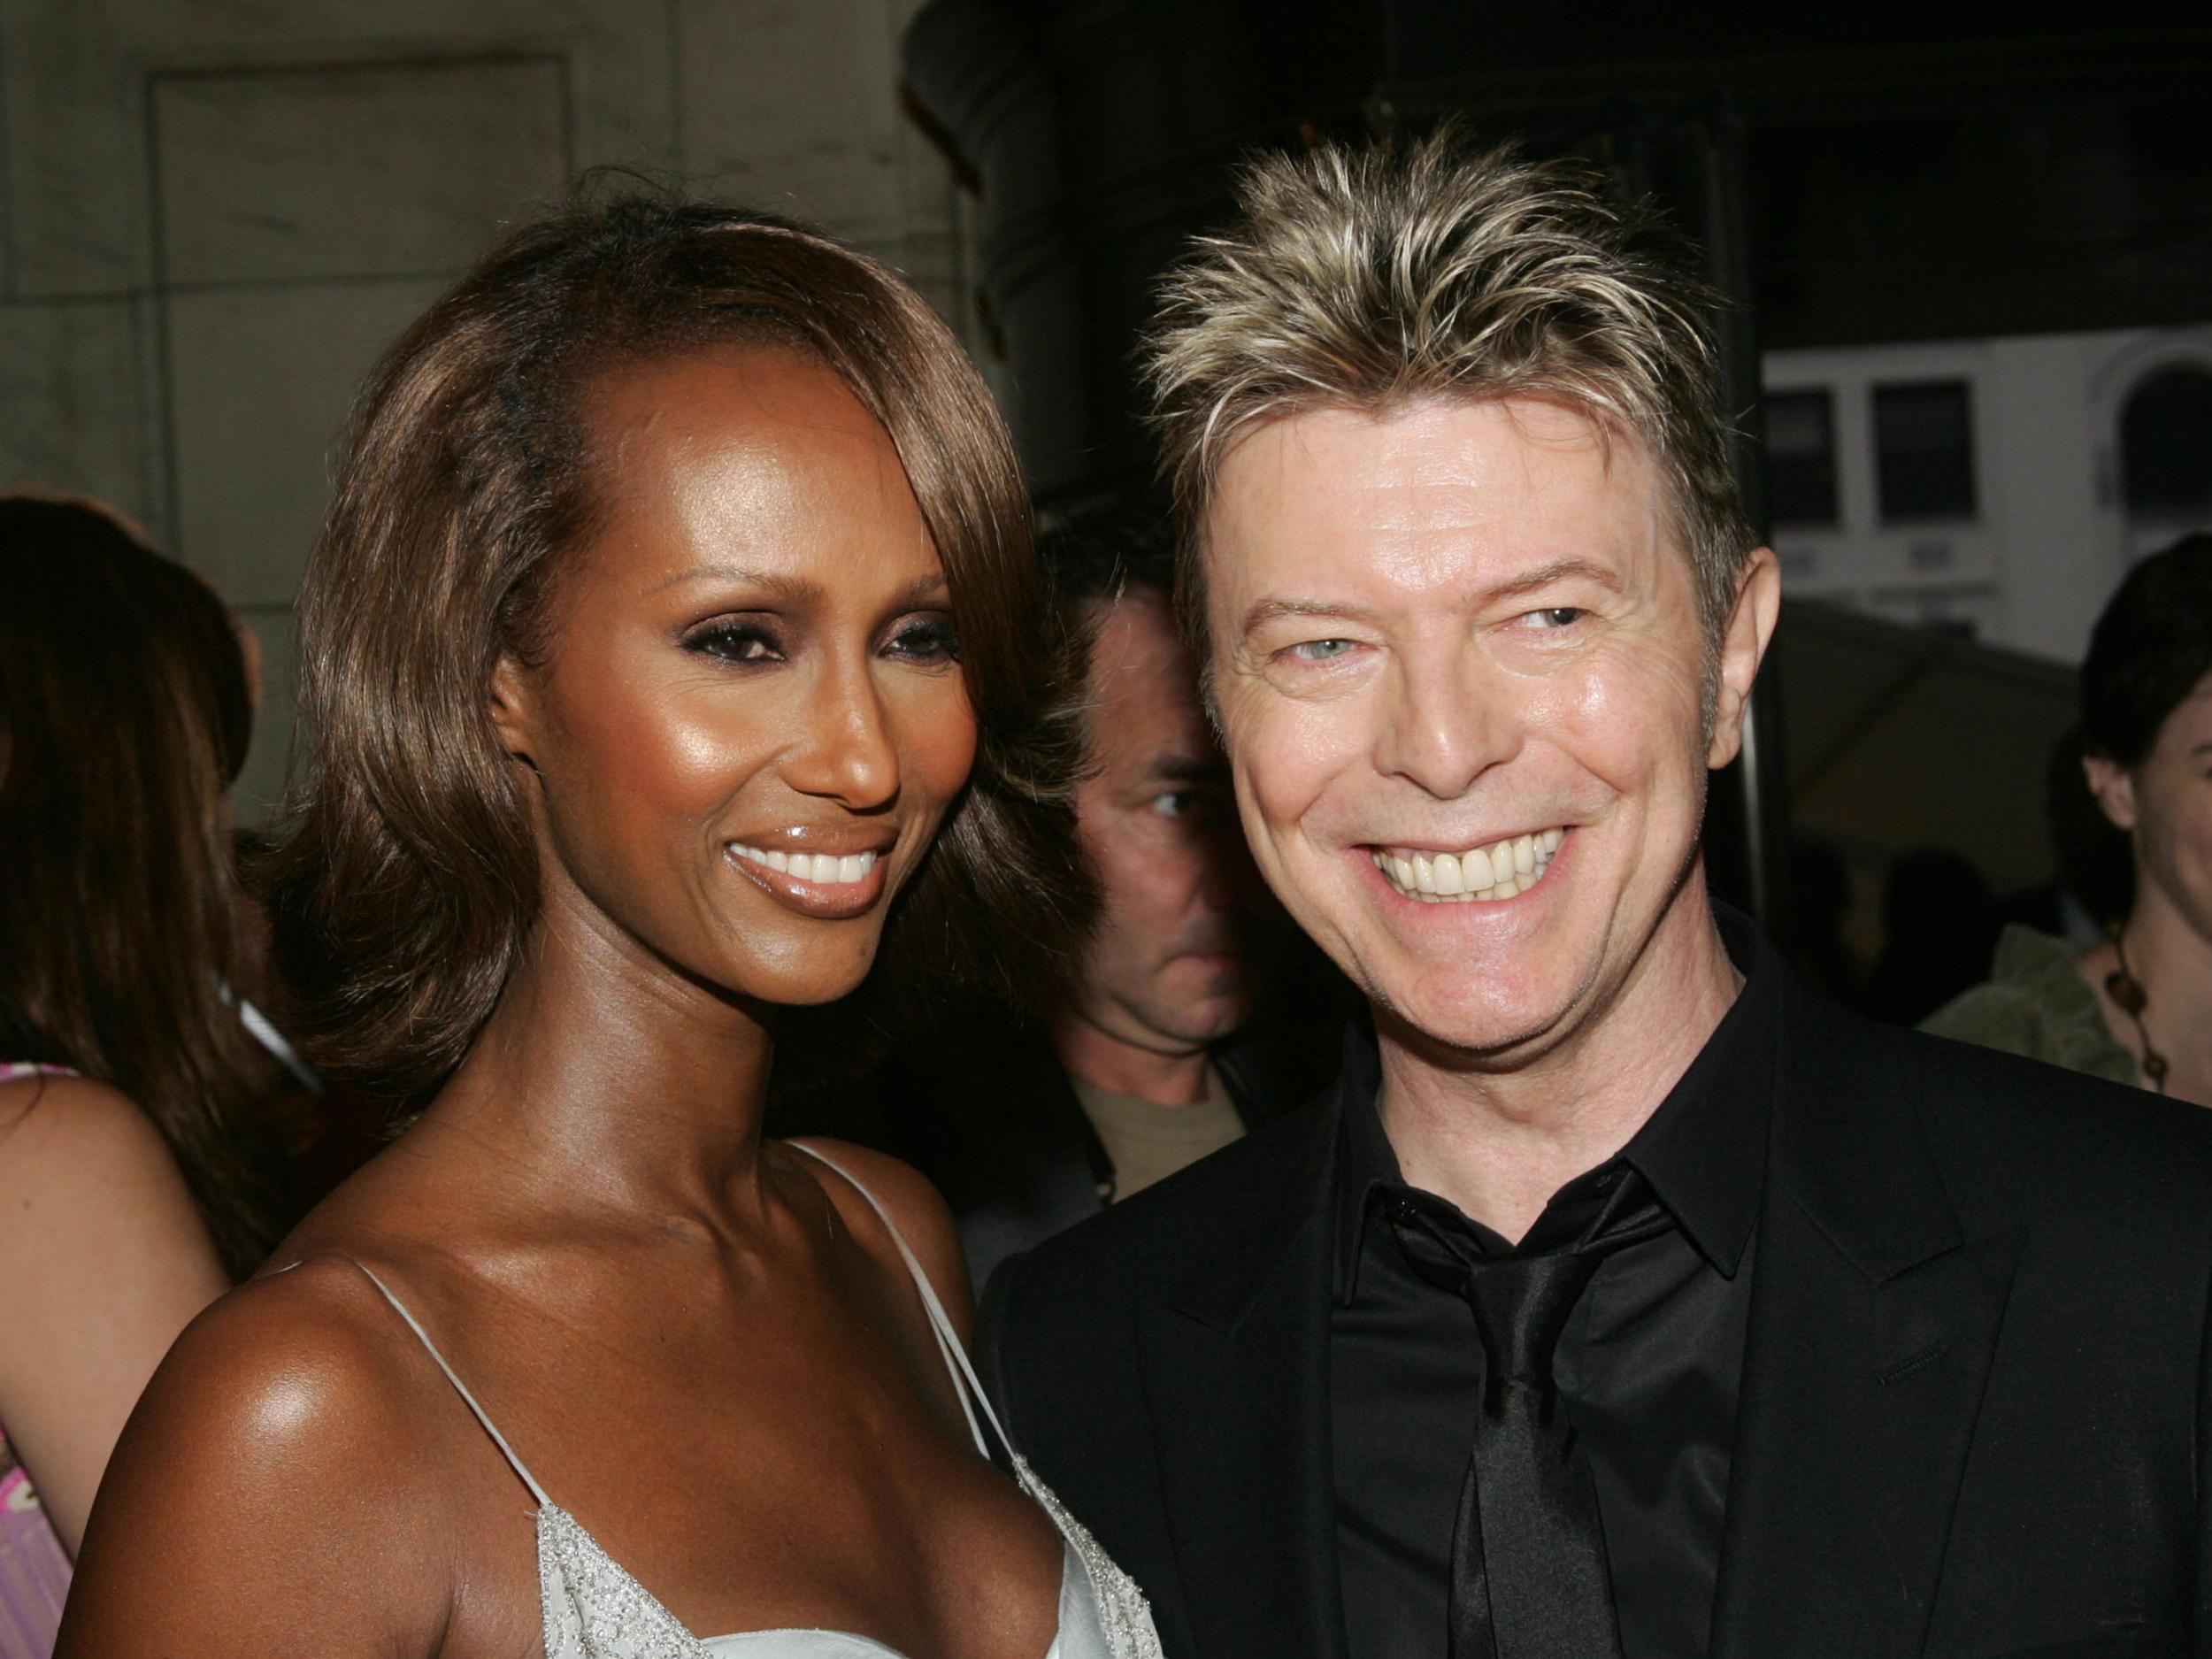 Model Iman and her husband David Bowie in 2005